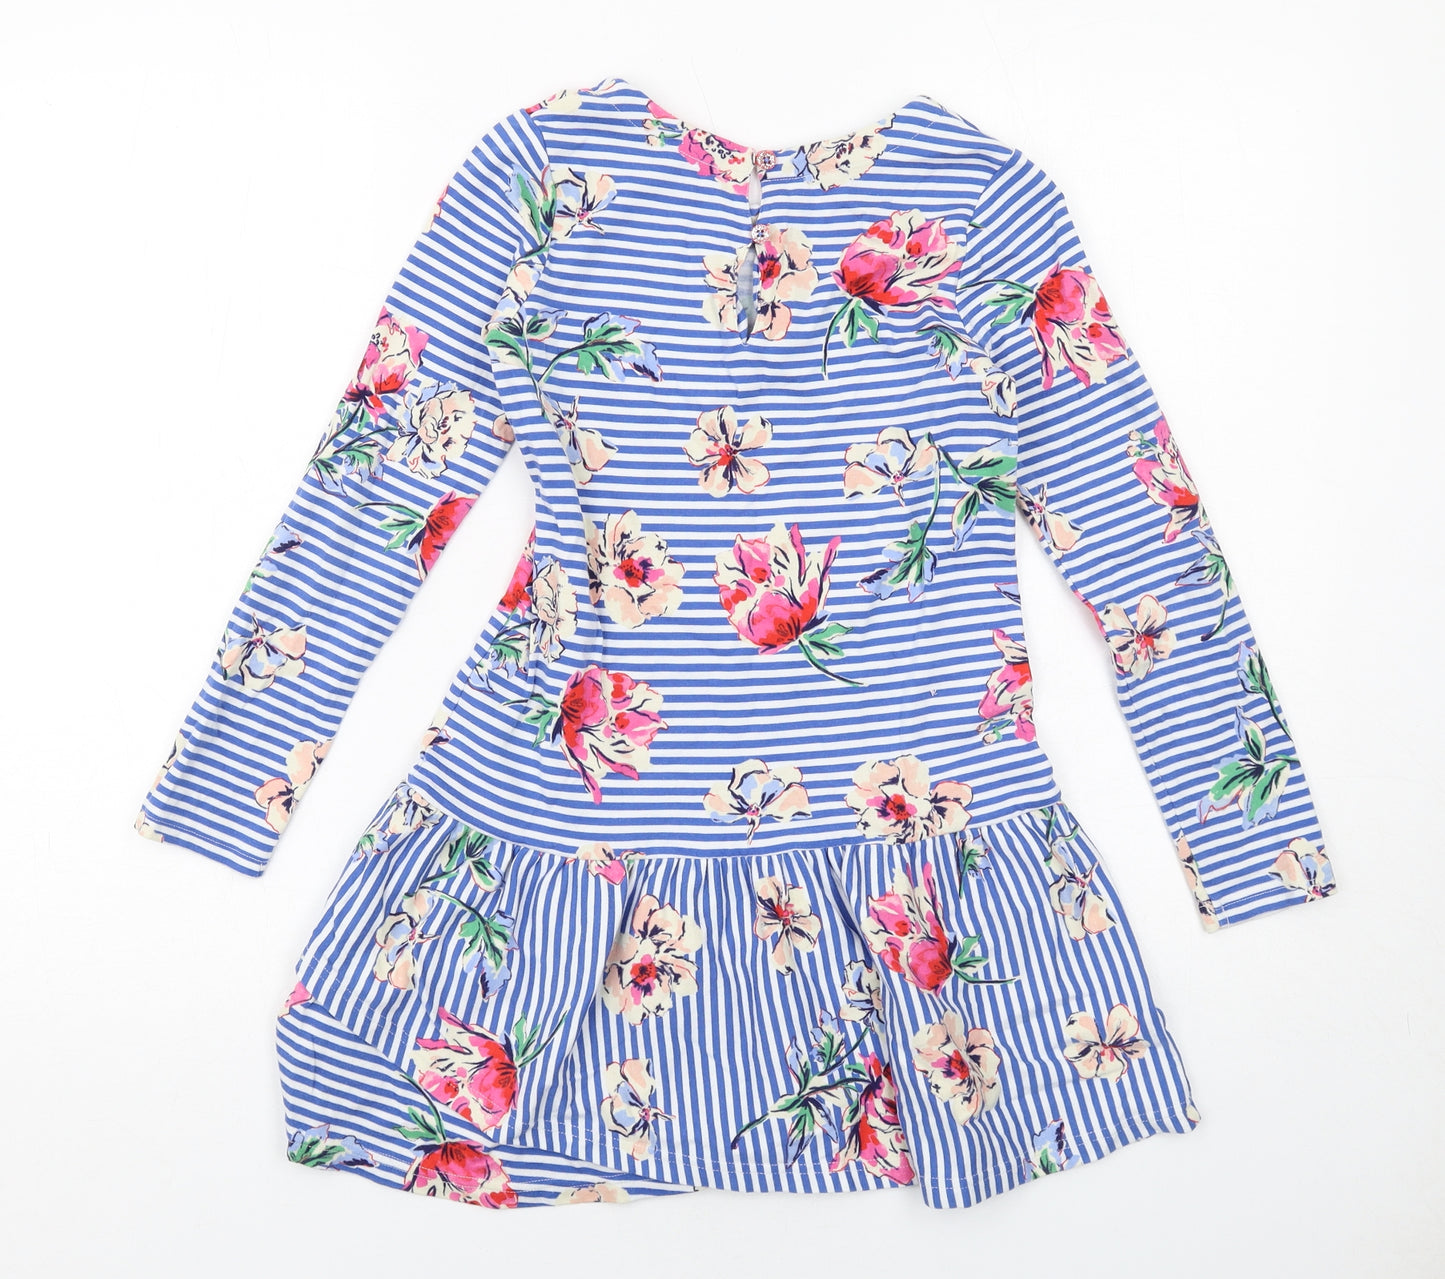 Joules Girls Blue Striped Cotton A-Line Size 9-10 Years Round Neck Button - Roses